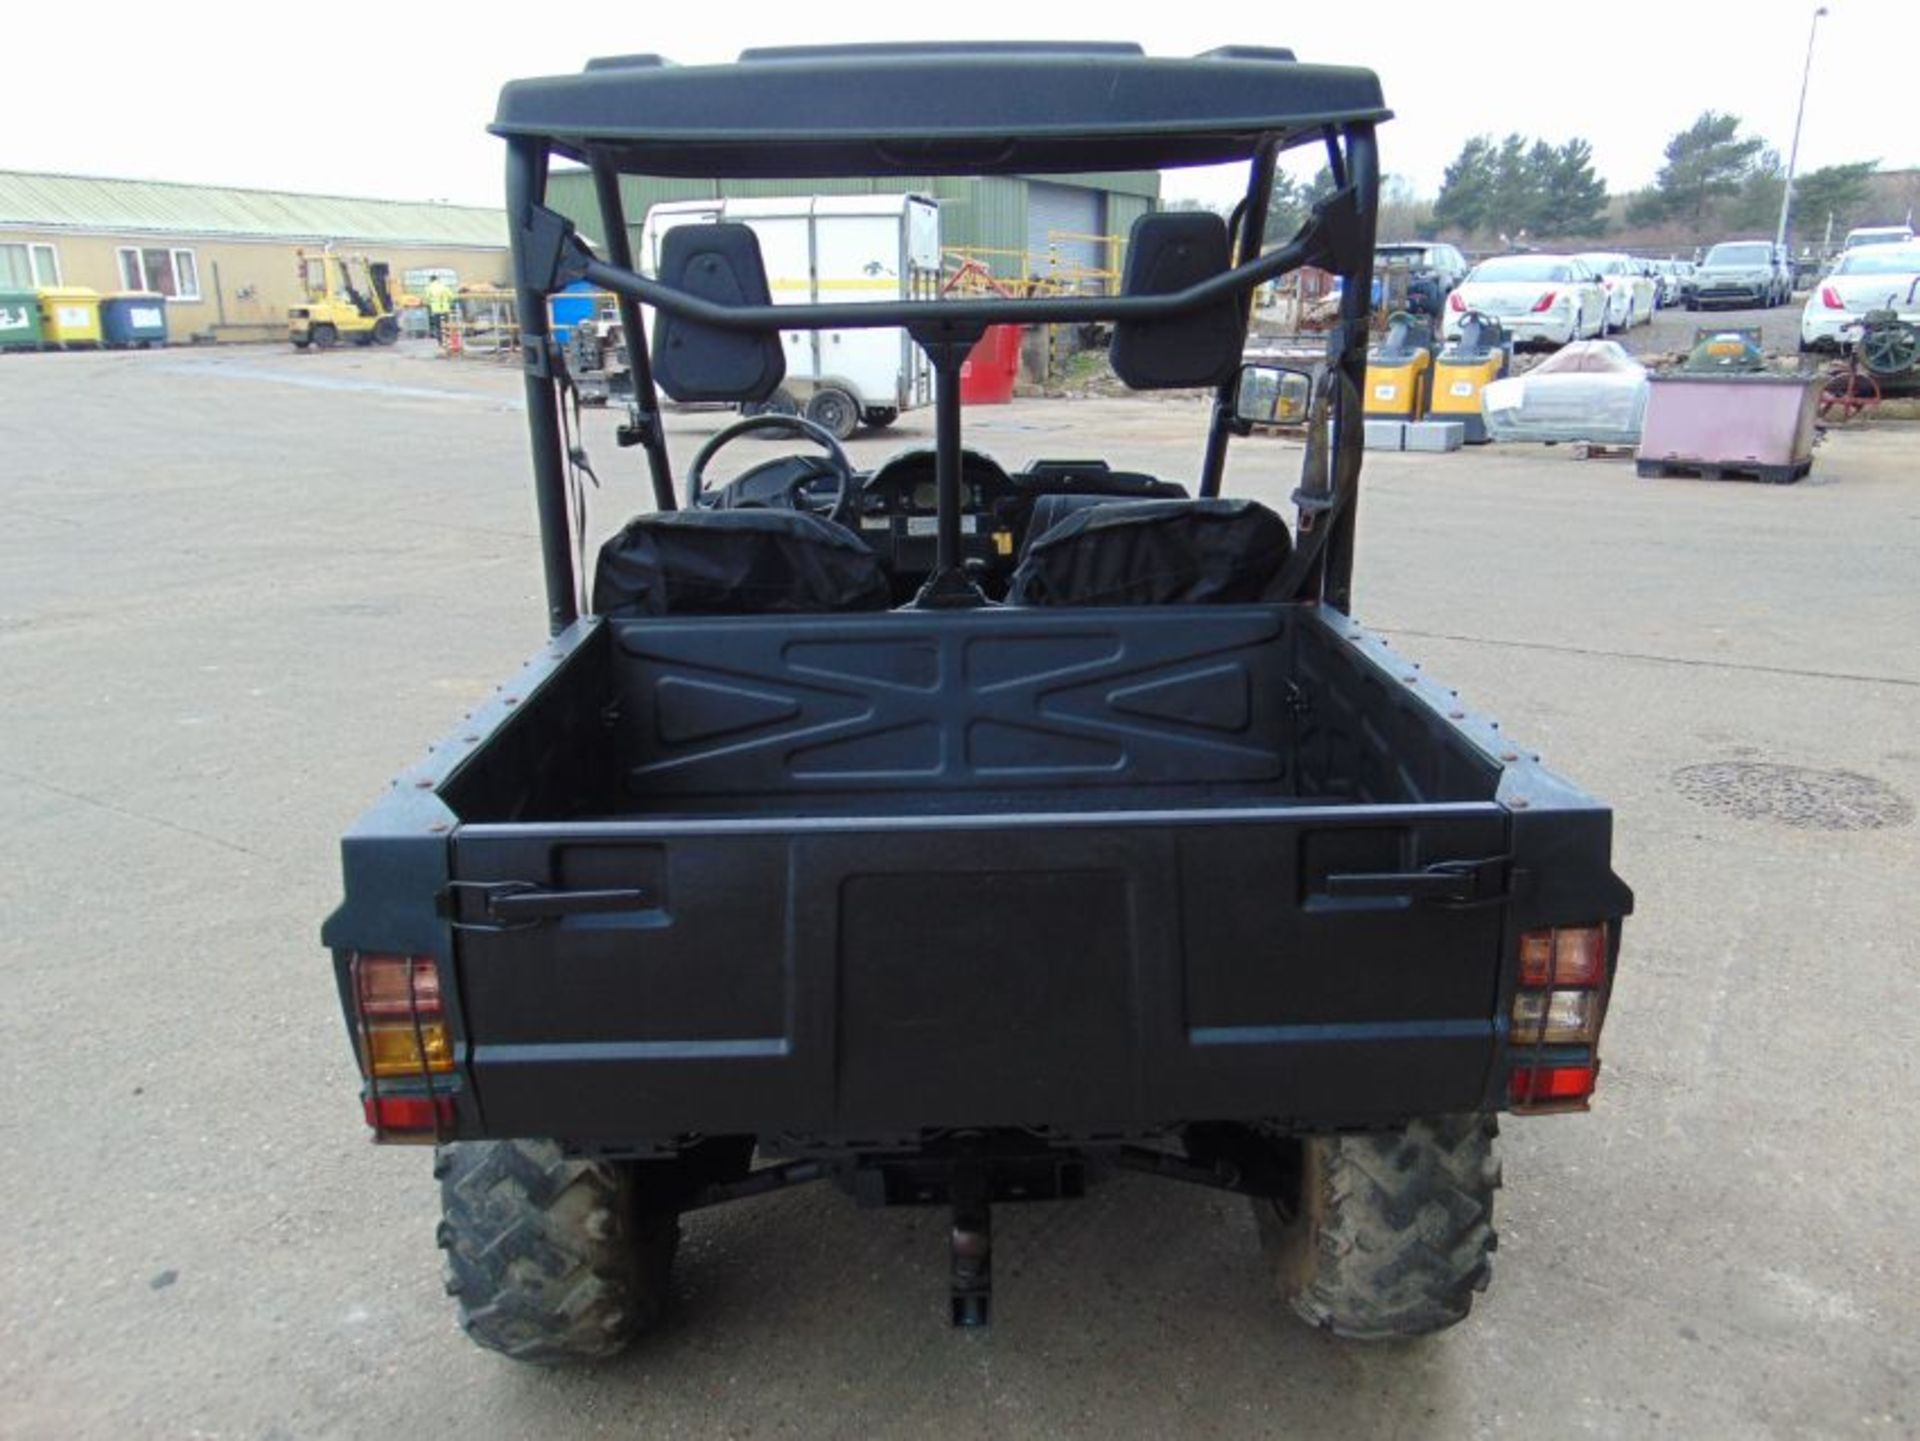 FARR 700 EFI Utility Vehicle ONLY 403 HOURS! - Image 7 of 22